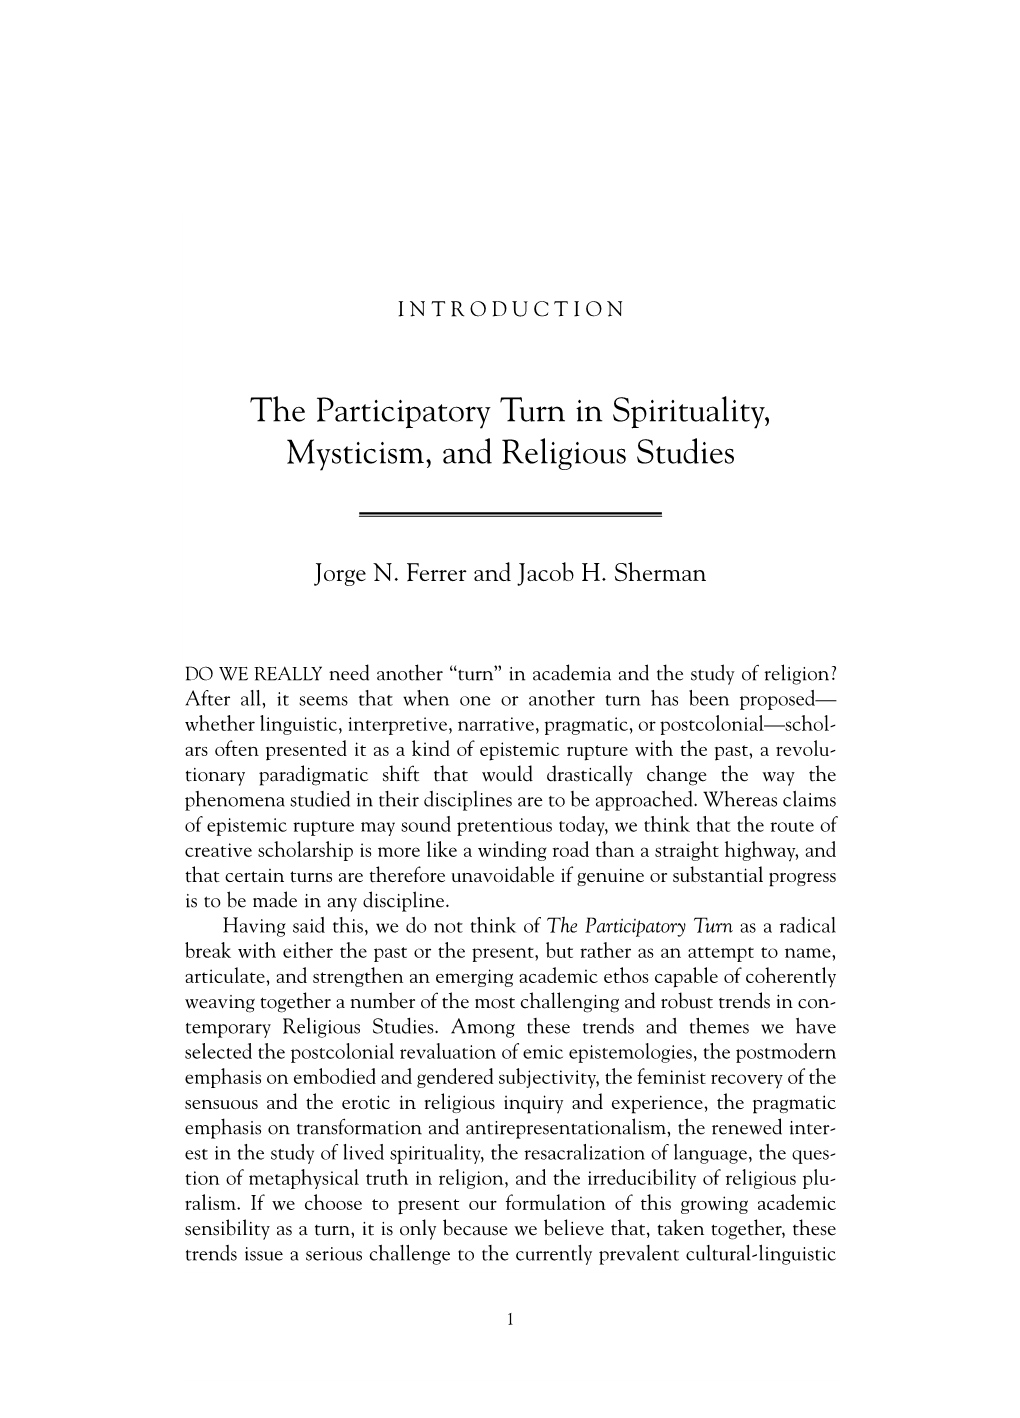 The Participatory Turn in Spirituality, Mysticism, and Religious Studies